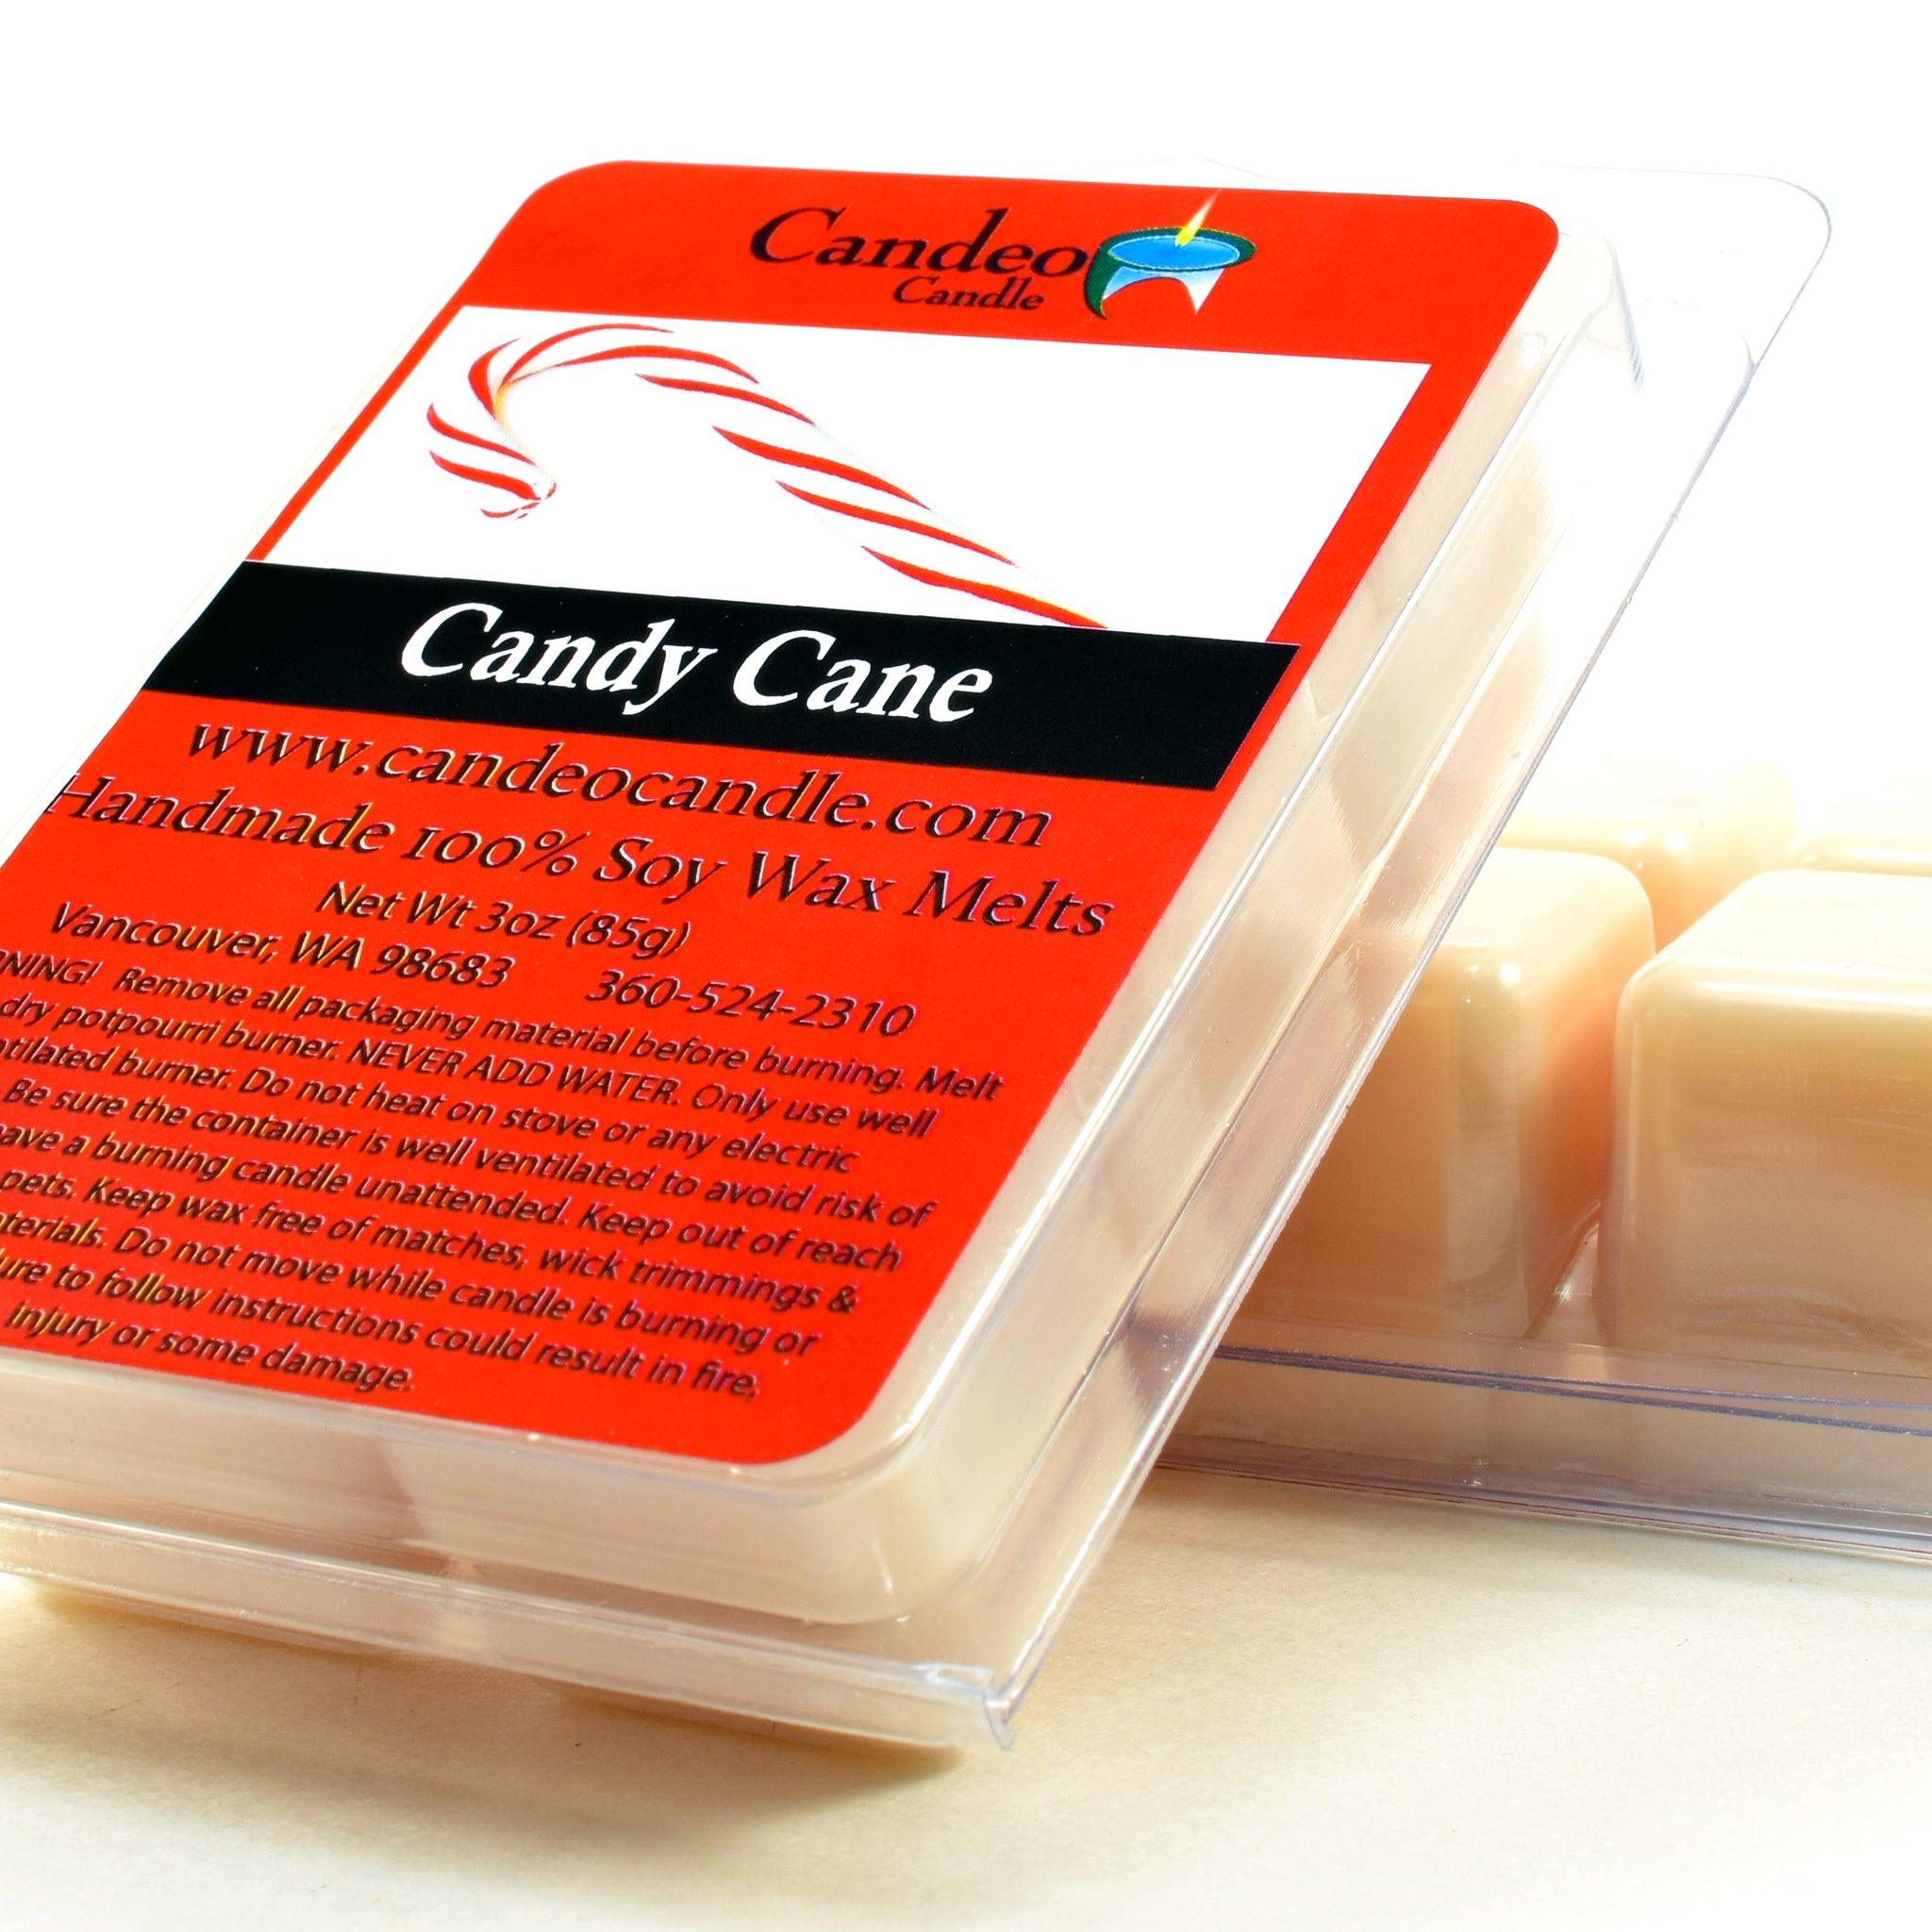 Candy Cane, Soy Melt Cubes, 2-Pack - Candeo Candle